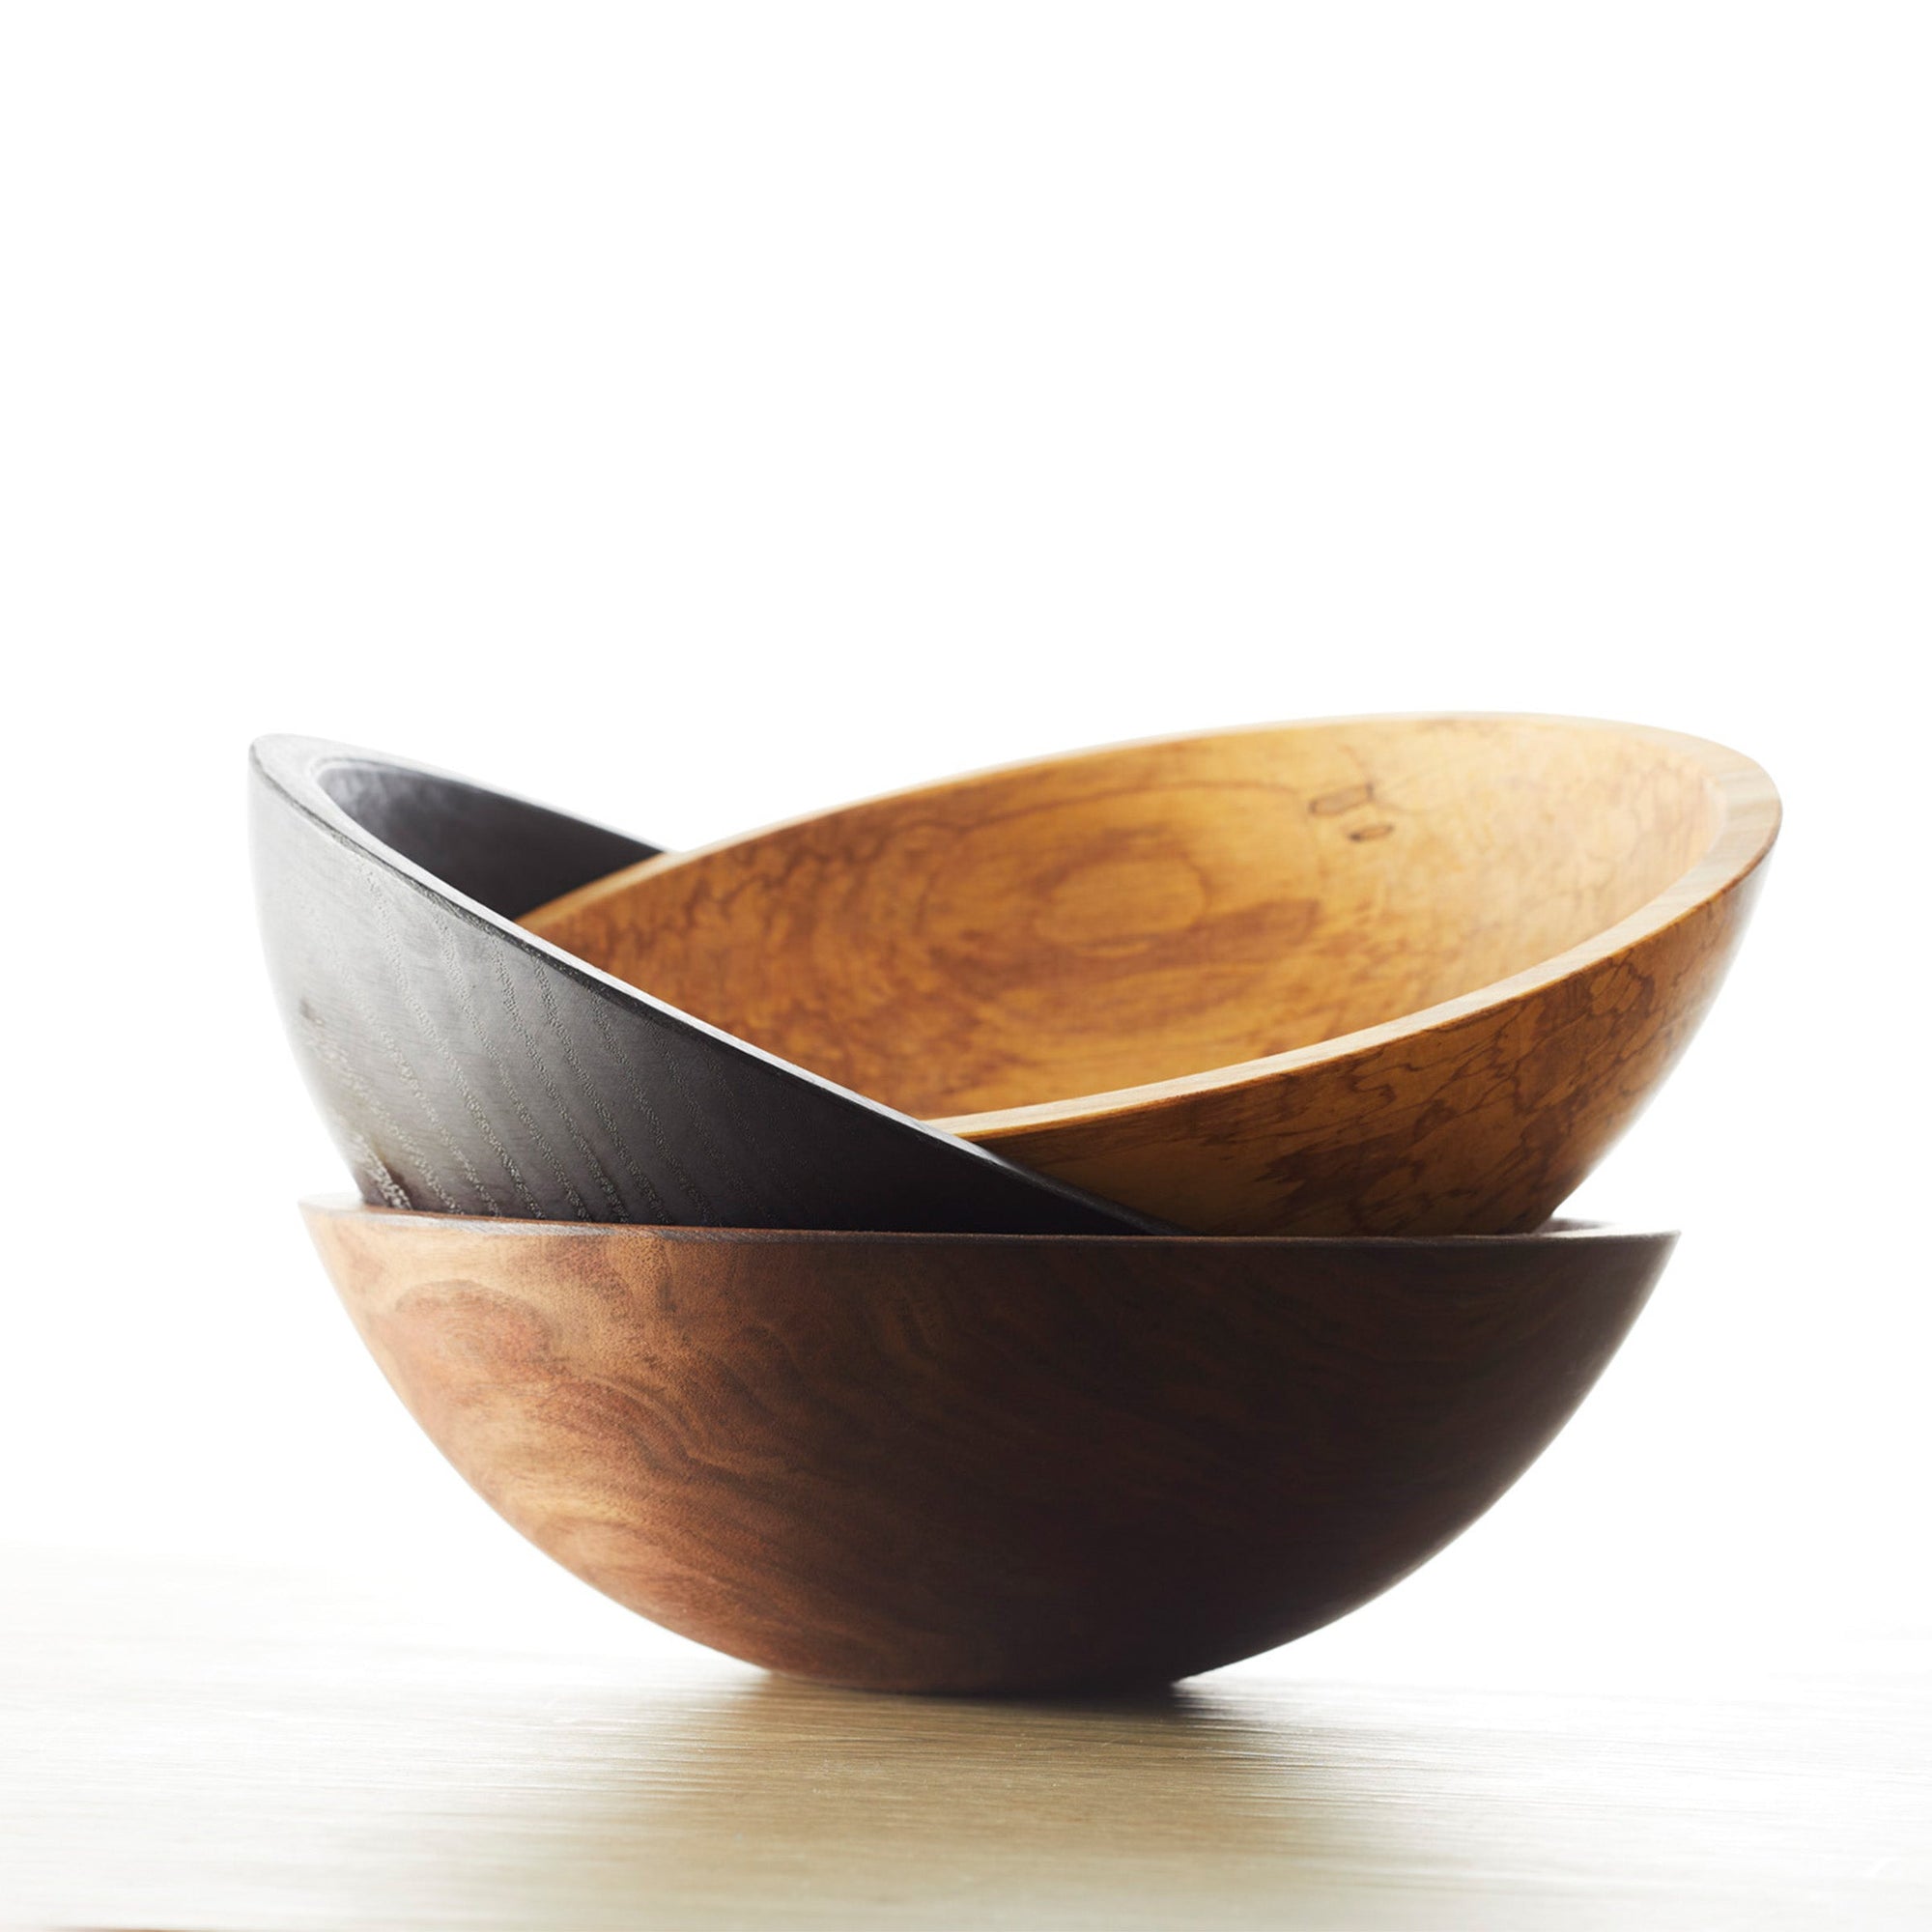 A Peterman's Black Walnut 13" Handcrafted Serving Bowl with a salad in it crafted by an artisan woodworker.